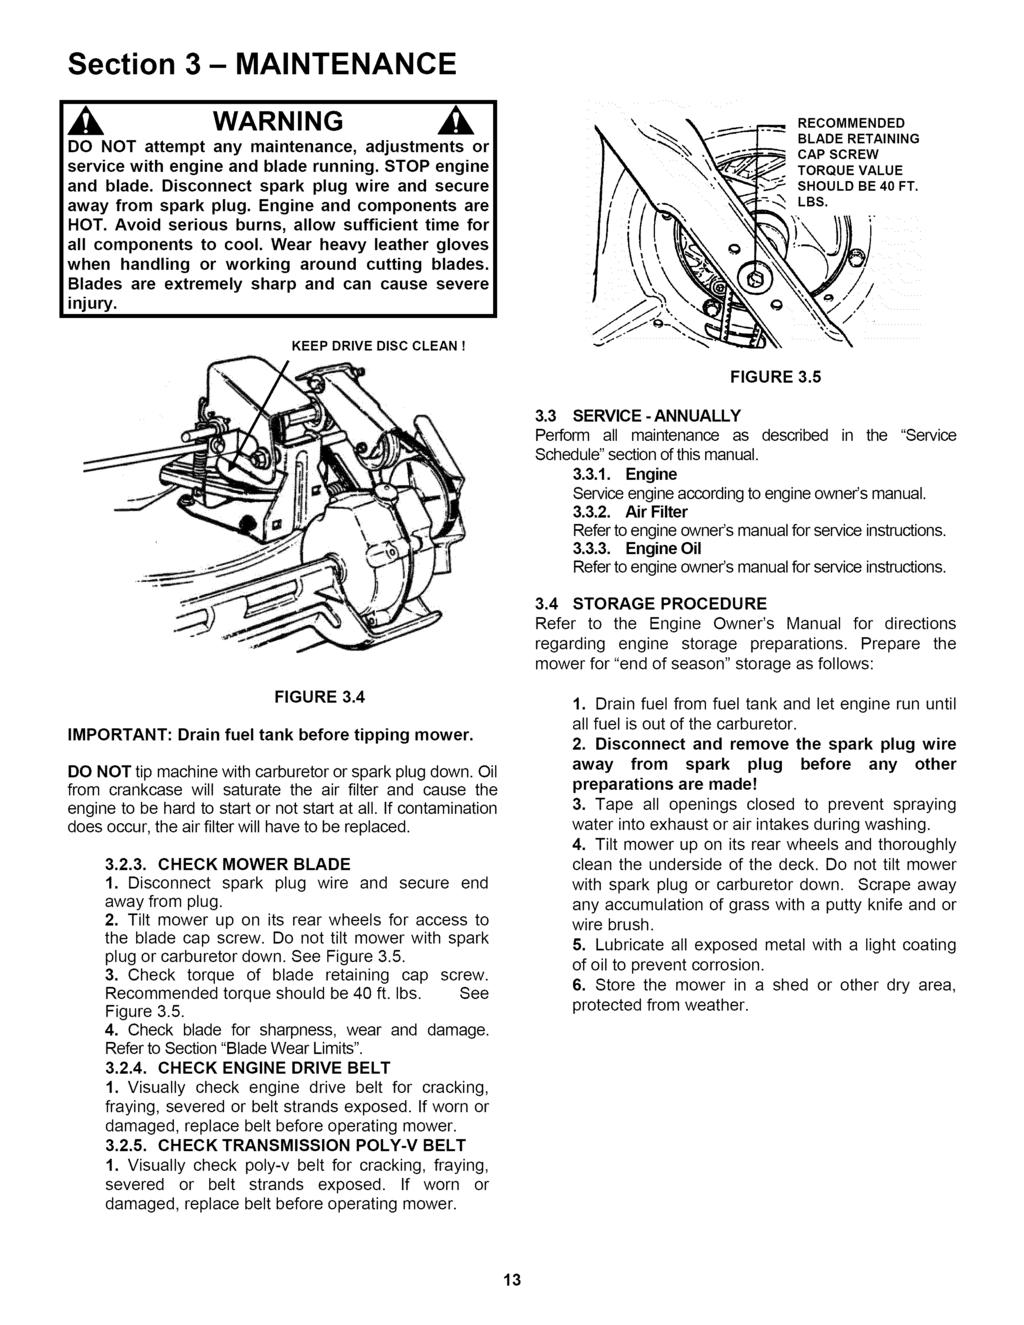 Section 3- MAINTENANCE DO NOT attempt any maintenance, adjustments or servicewith engine and blade running.stop engine and blade. Disconnect spark plug wire and secure away from spark plug.